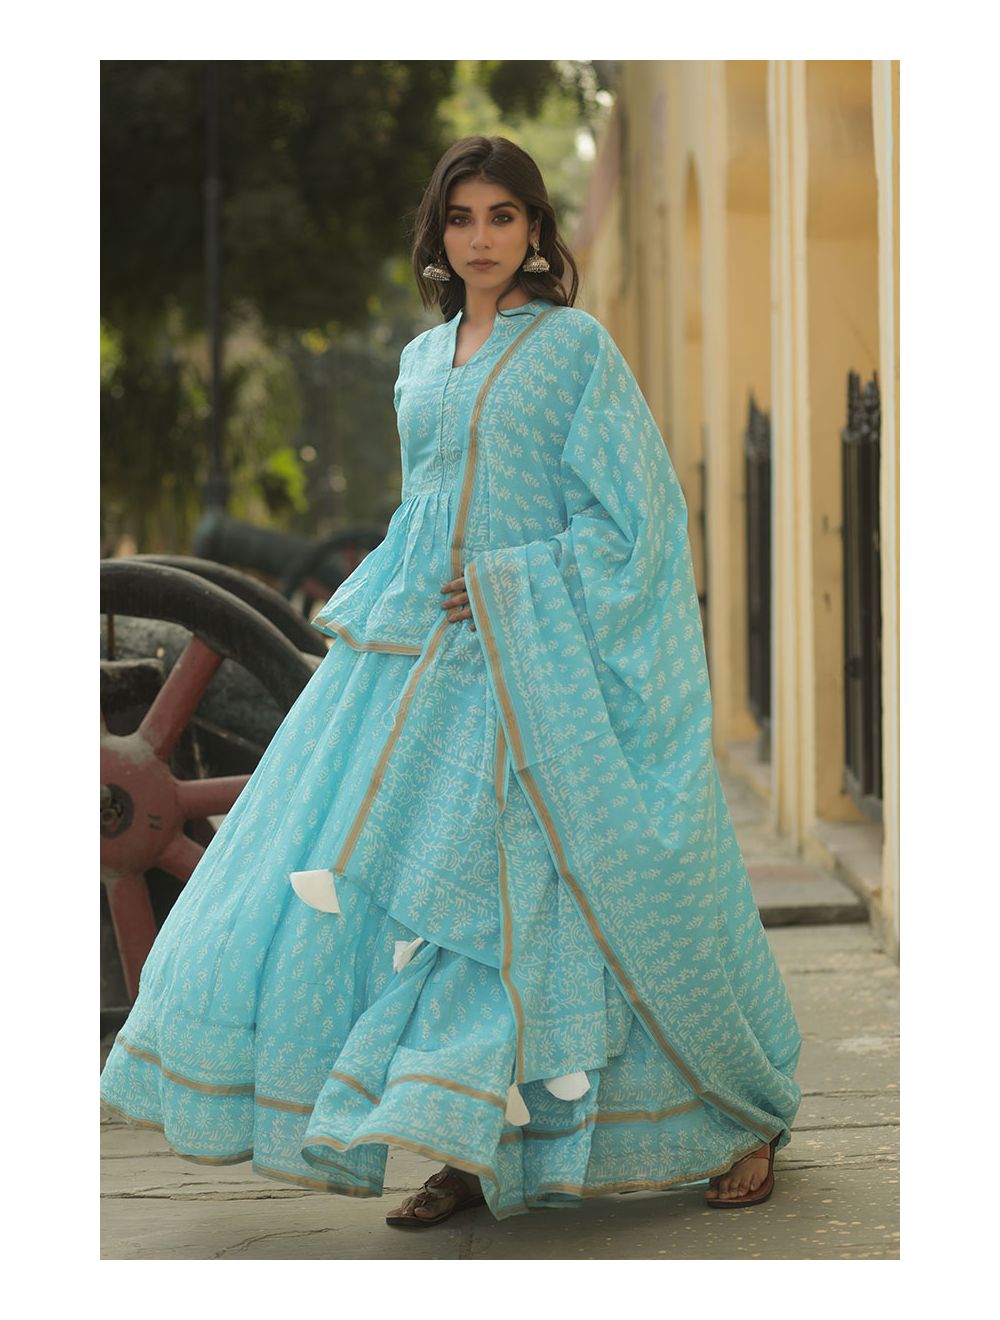 Buy Get Glamorous in Our Velvet Lehenga Set Long Top & Dupatta Included  Indian Sabyasachi Lehenga Inspired Two Chic Color Choices Online in India -  Etsy